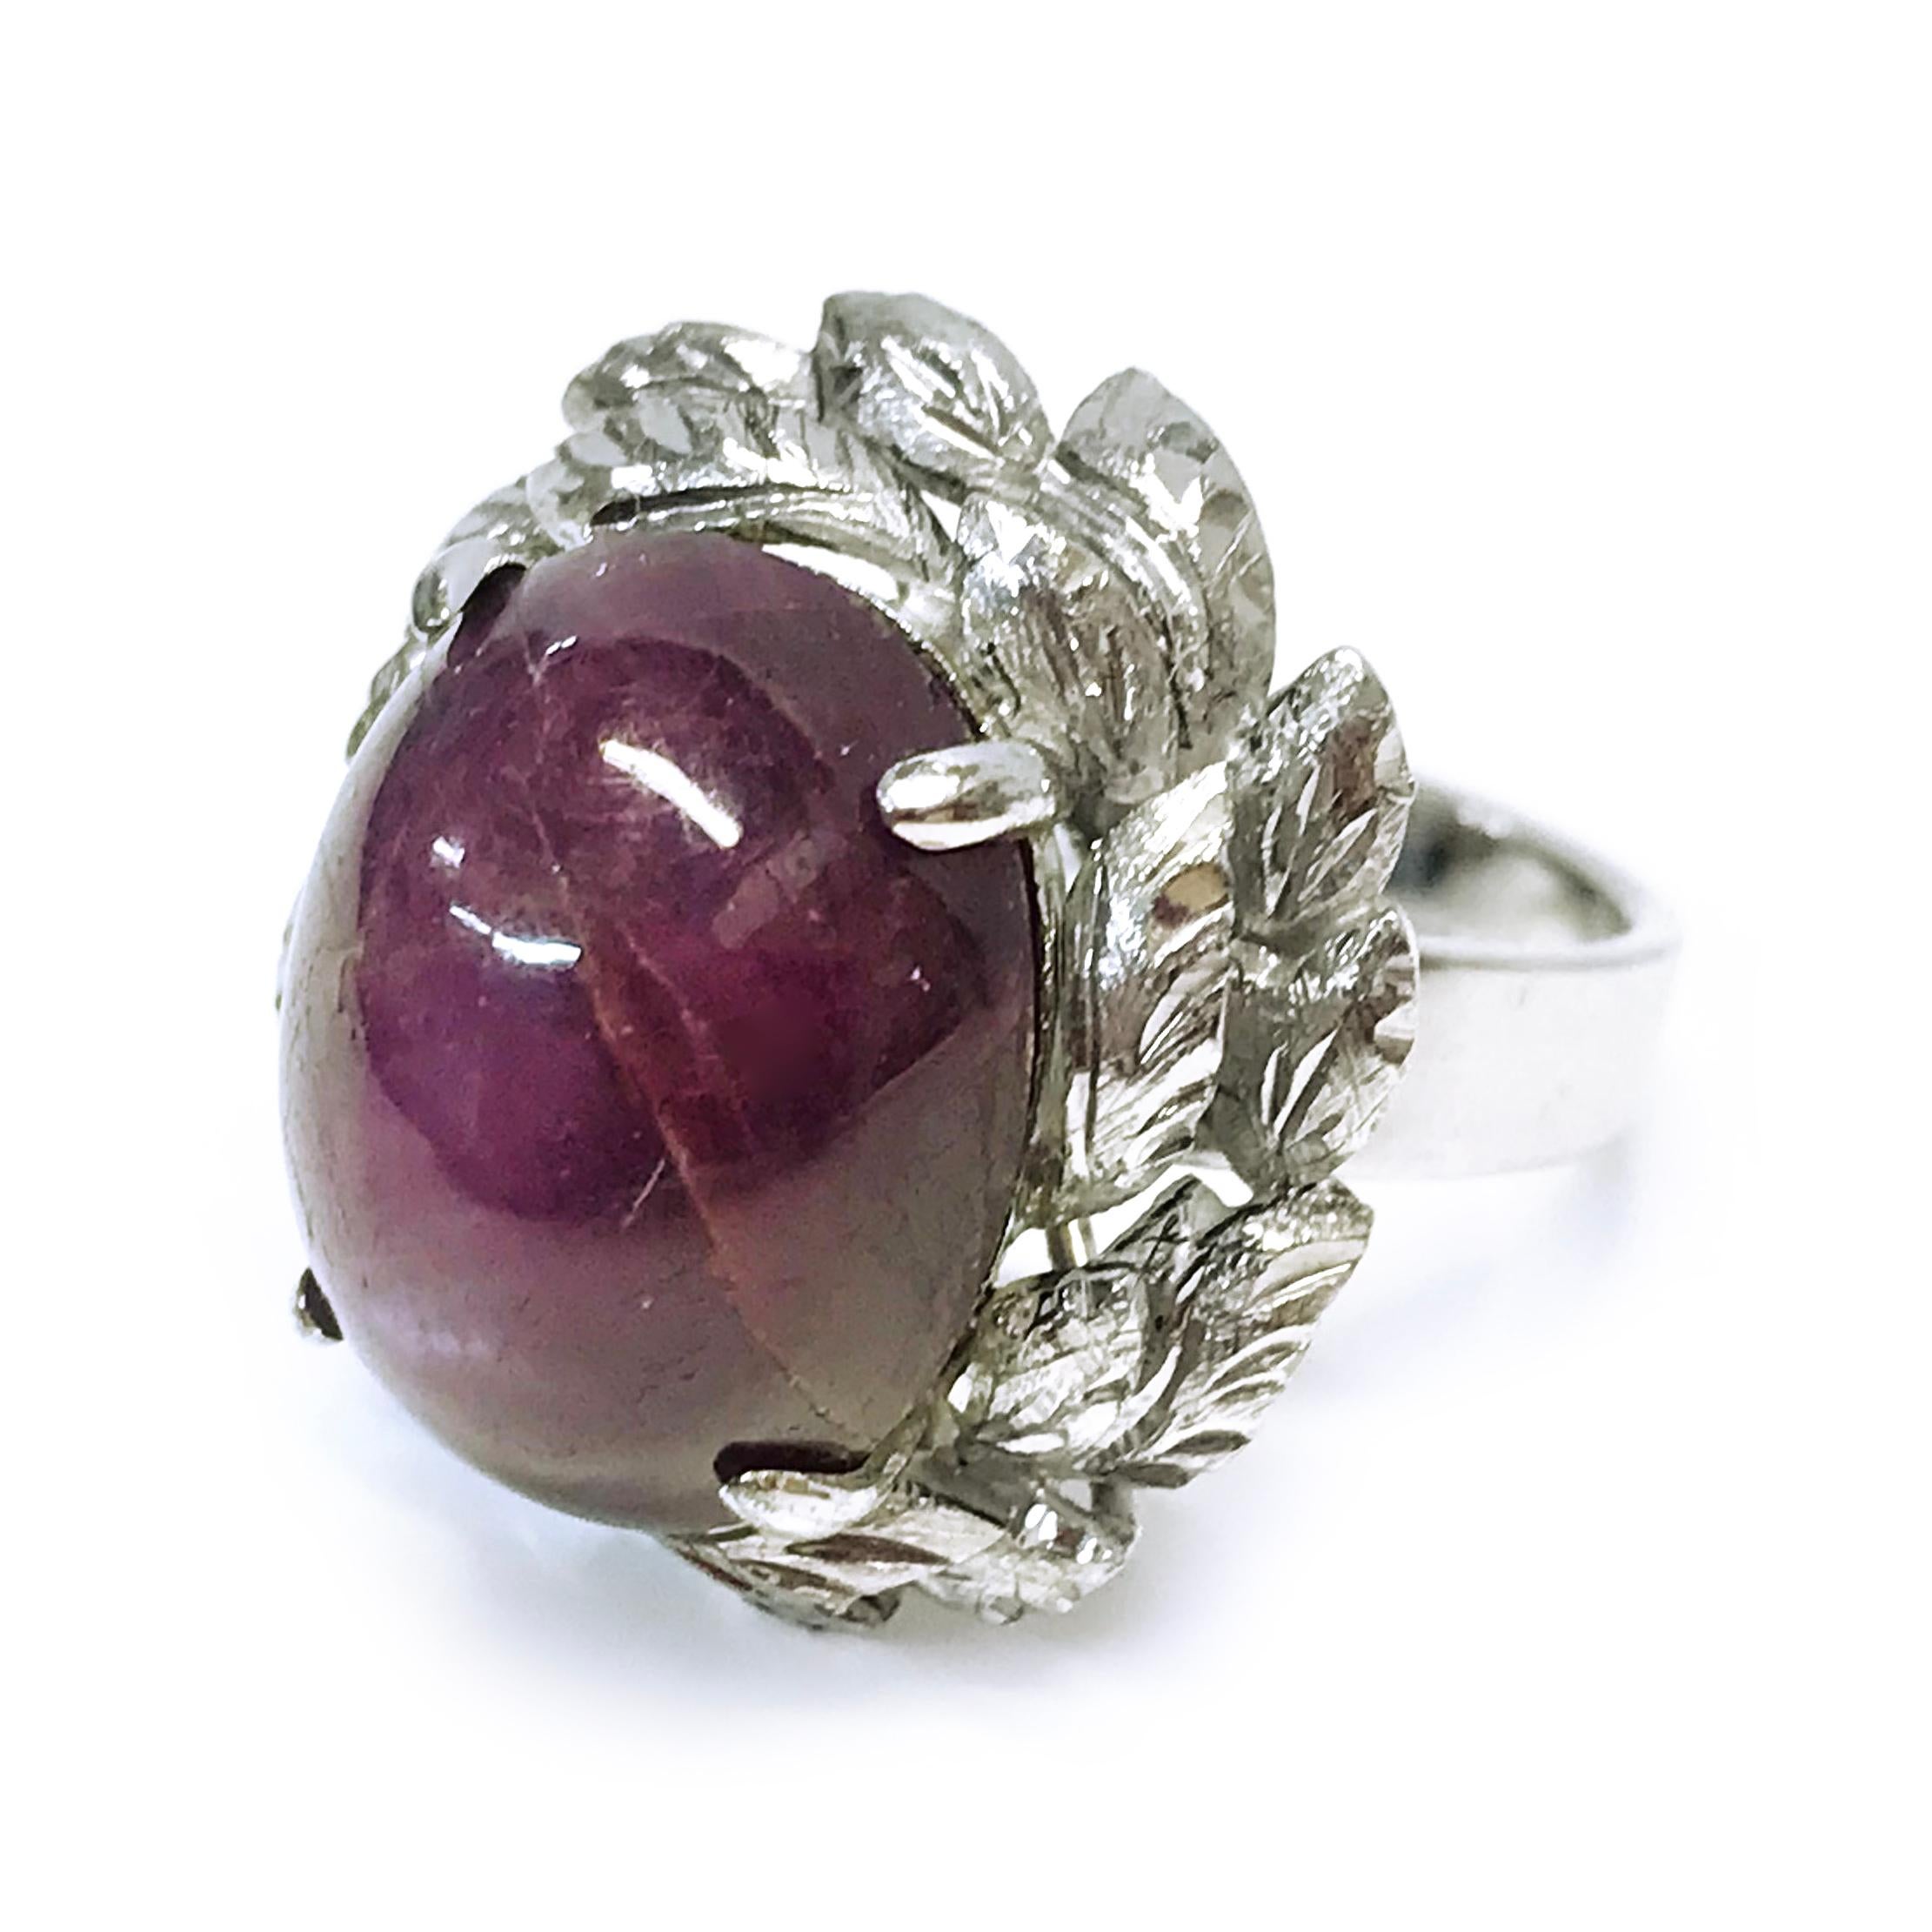 18 Karat White Gold Ruby Star Sapphire Ring. The natural Ruby Sapphire measures 16mm x 12mm, and is four-prong set with two tiers of diamond-cut leaves around the setting. The six-pointed star has a good presence with light. The ring size is 6 1/4